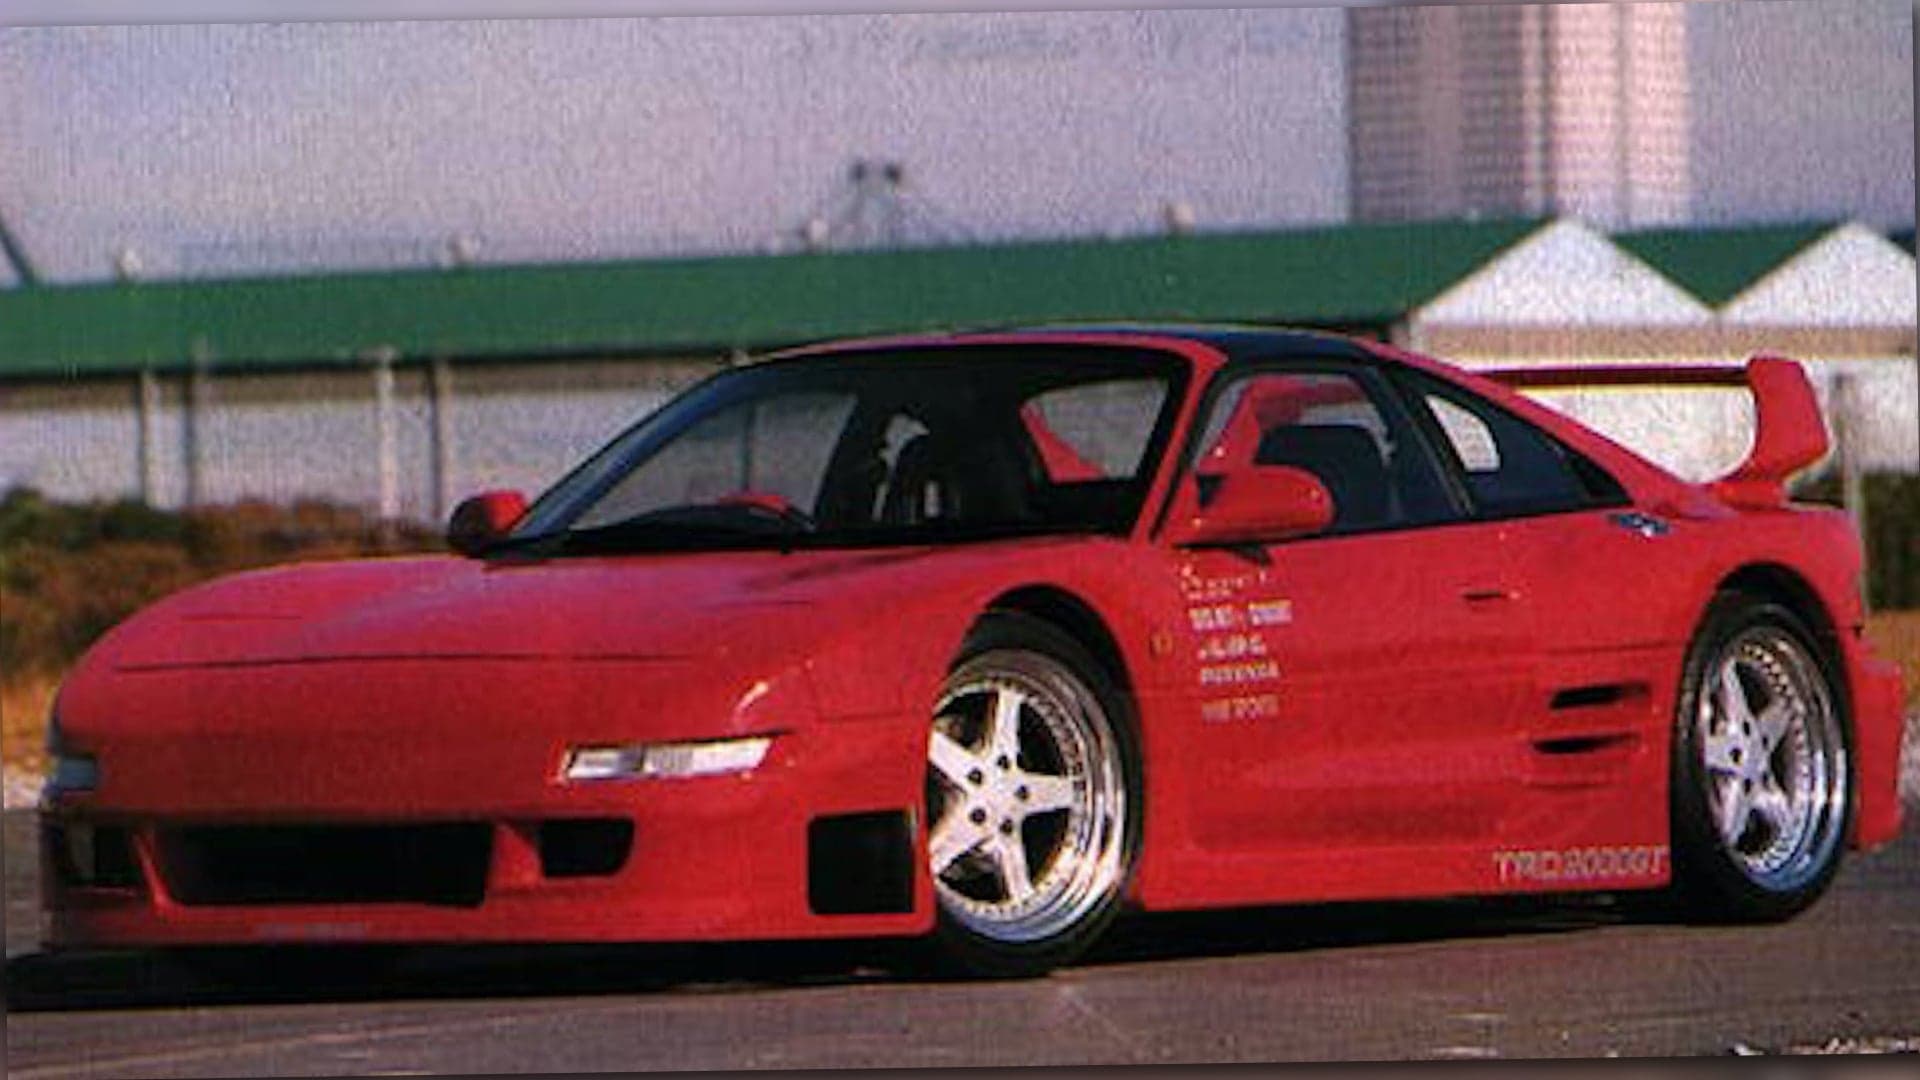 Toyota Built a Limited Number of Widebody MR2s in the ’90s, and Now’s Your Chance to Buy One